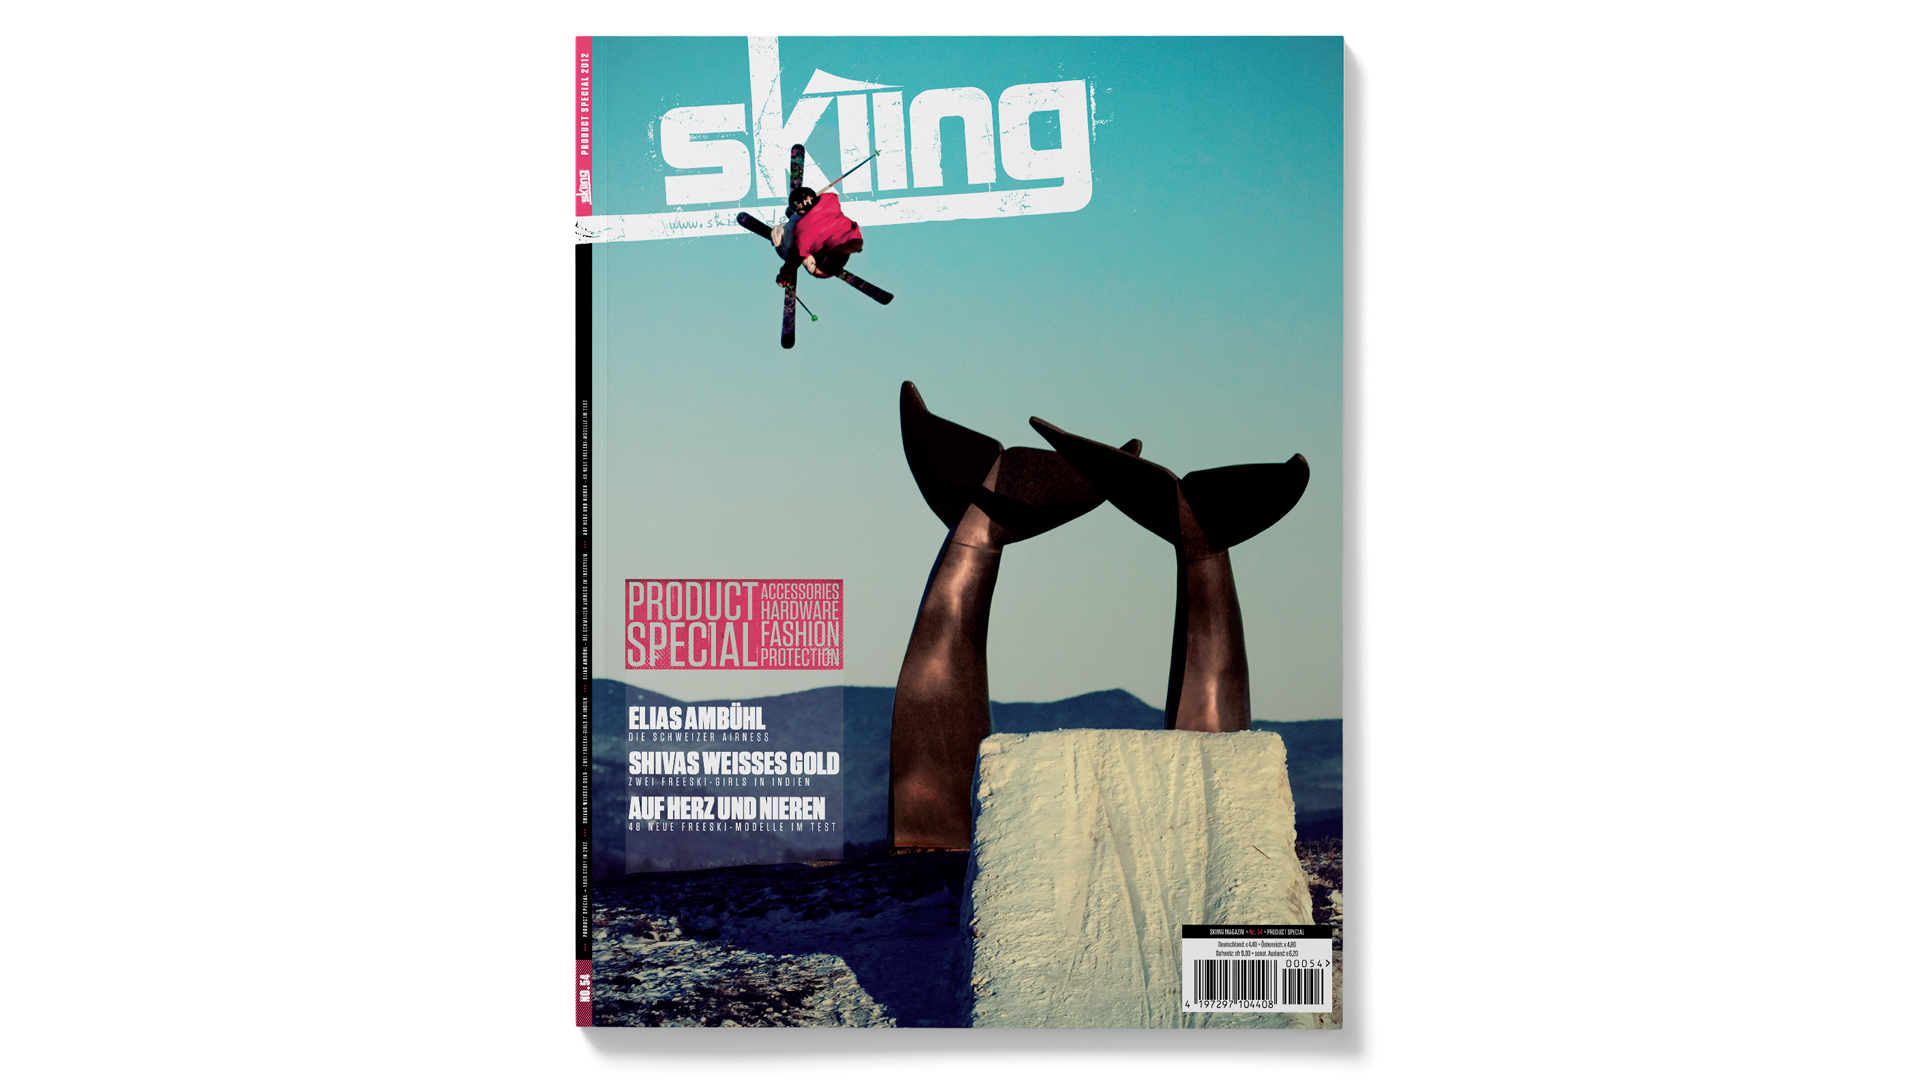 LJ Strenio on the cover of a skiing magazine.